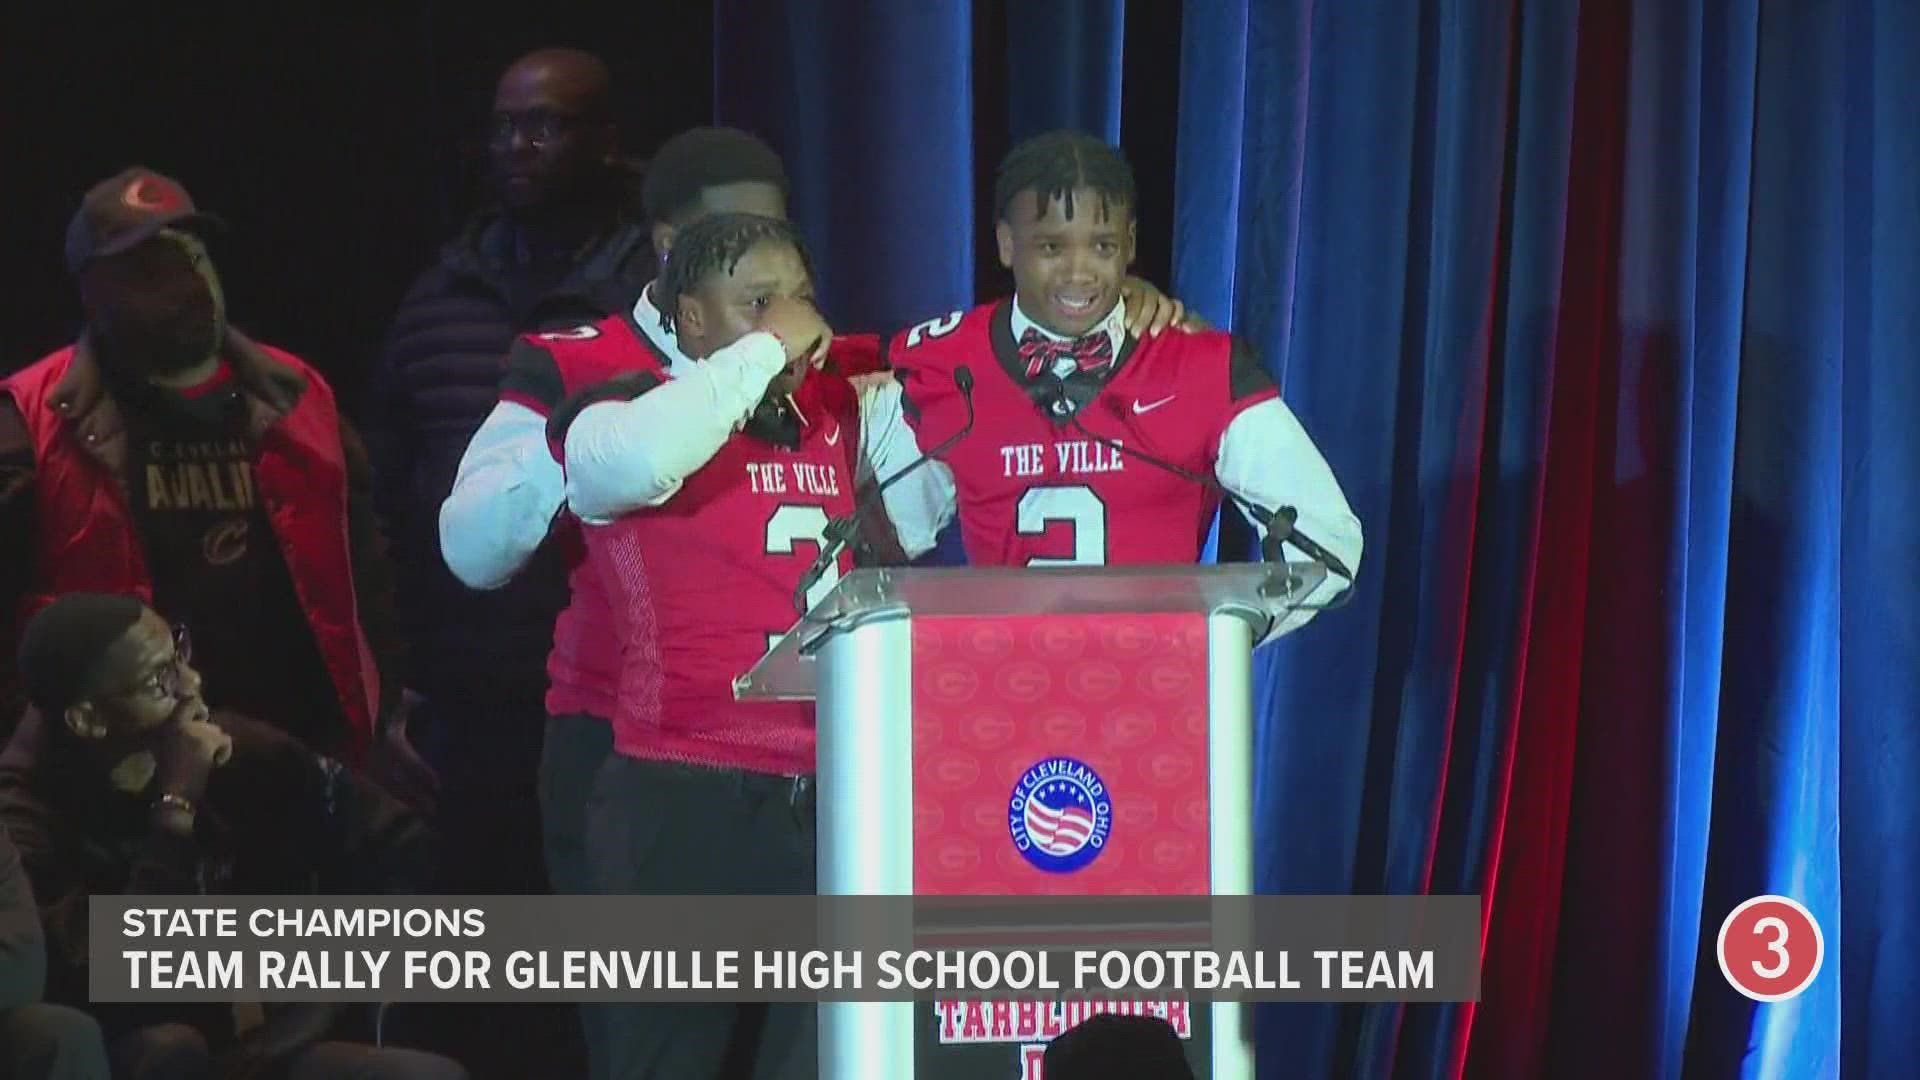 Glenville players emotional speeches during state title parade wkyc